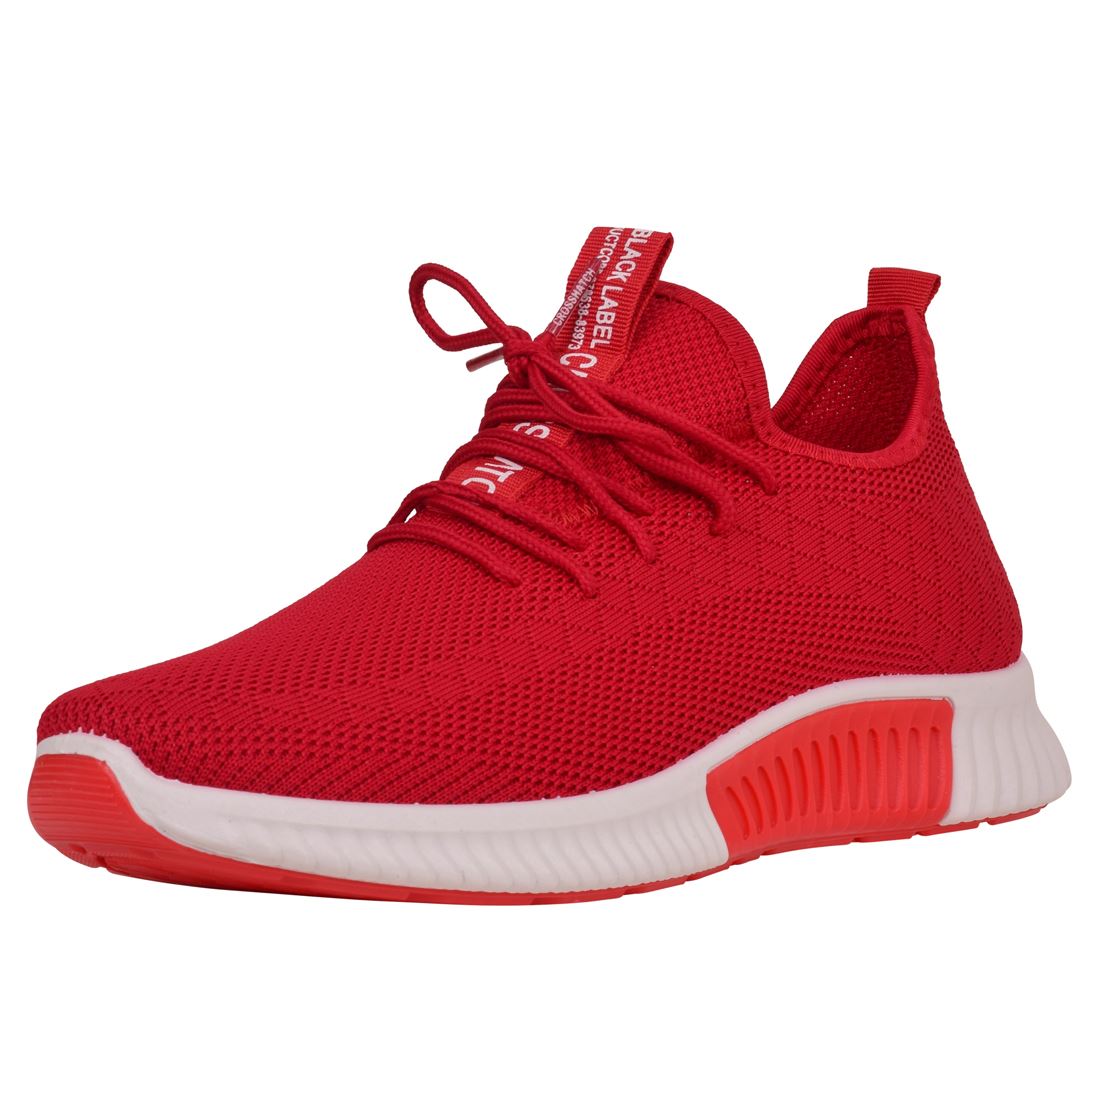 Men's Crosshatch Elasticated Fly-knit Trainers Lace Up Color Sole Sneakers- Red